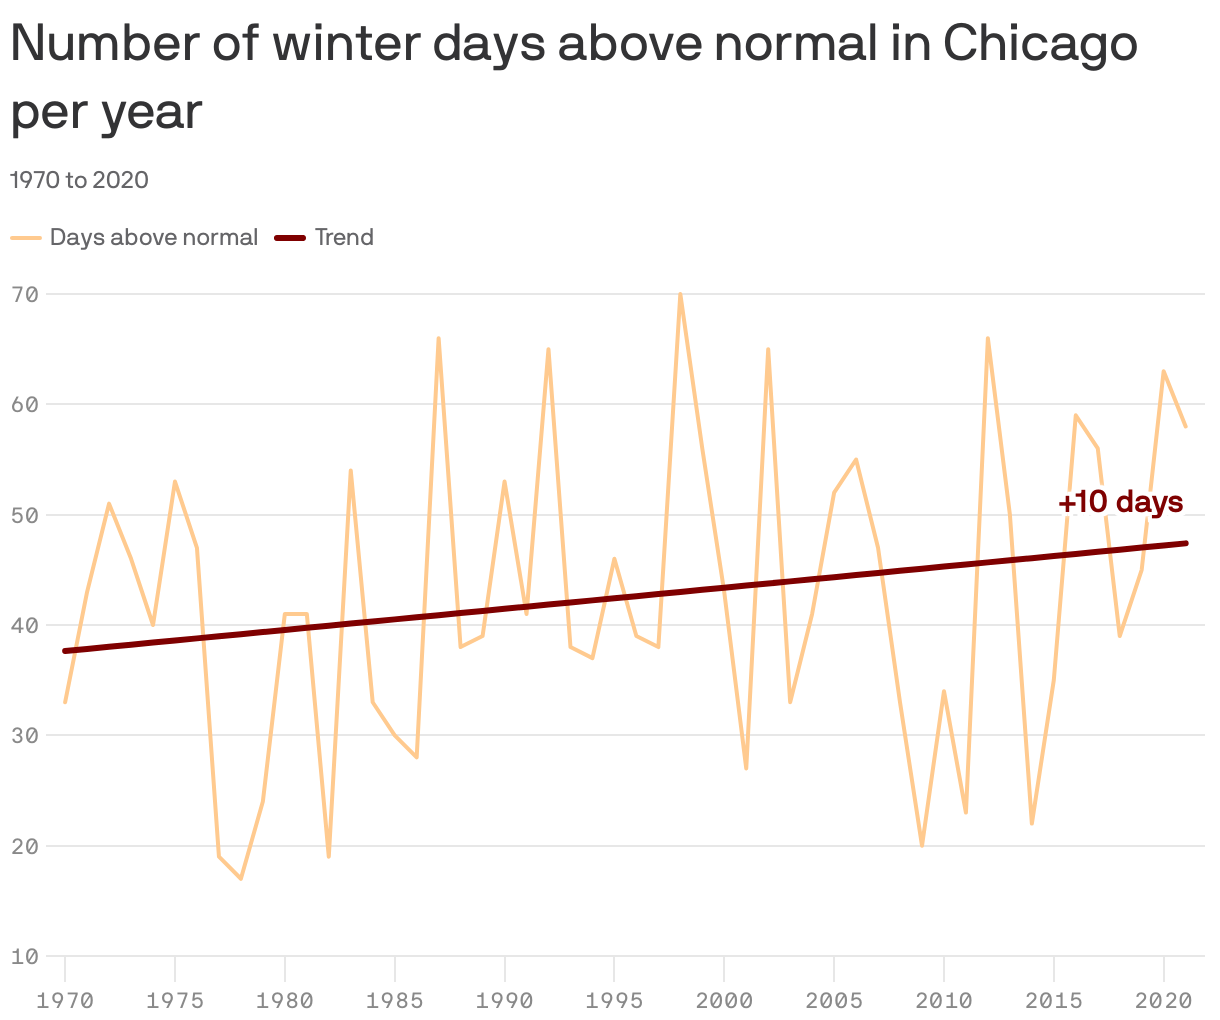 Number of winter days above normal in Chicago per year